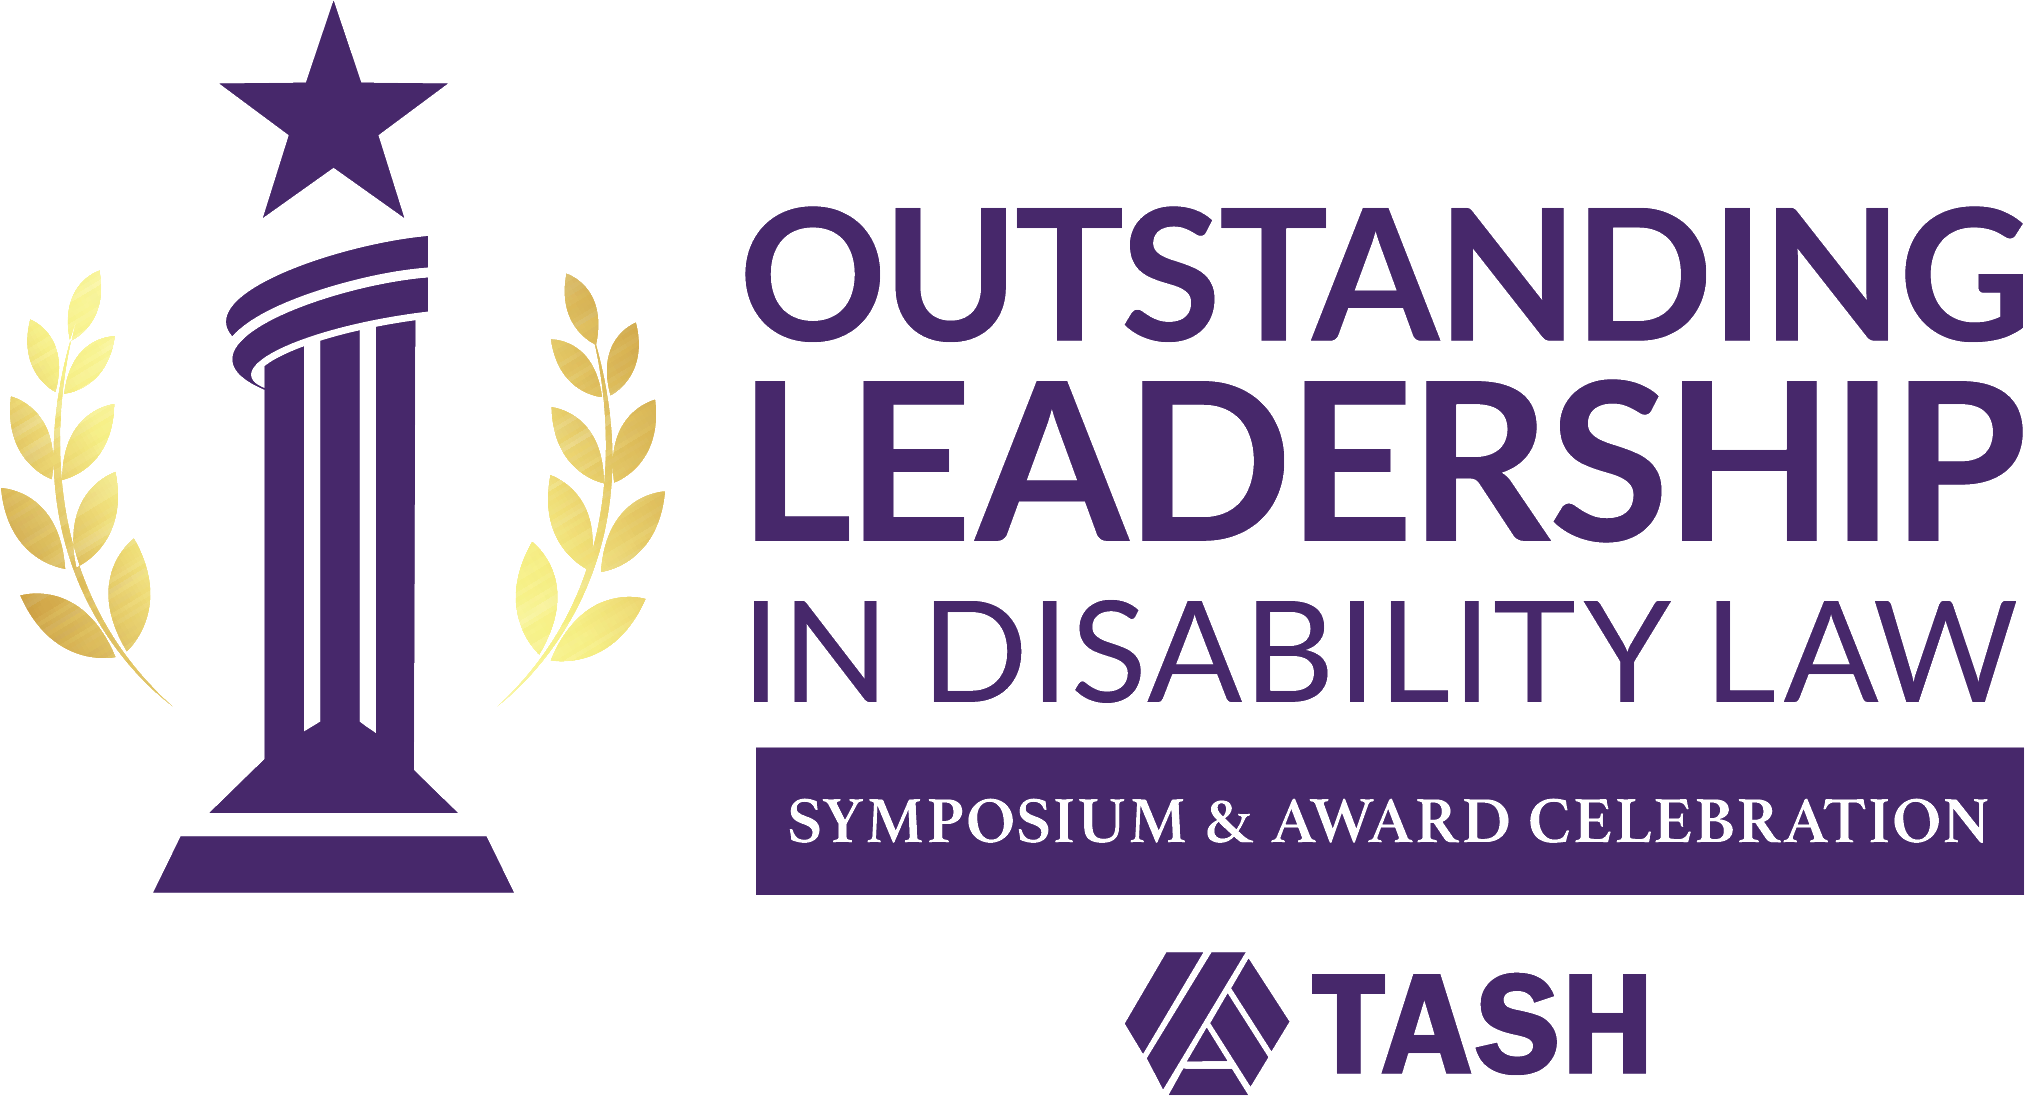 The logo for the Outstanding Leadership in Disability Law Symposium and Award Celebration. The event title in purple with an illustration of a stylized Doric column with a star and laurels in gold to the left and the TASH Möbius strip below.